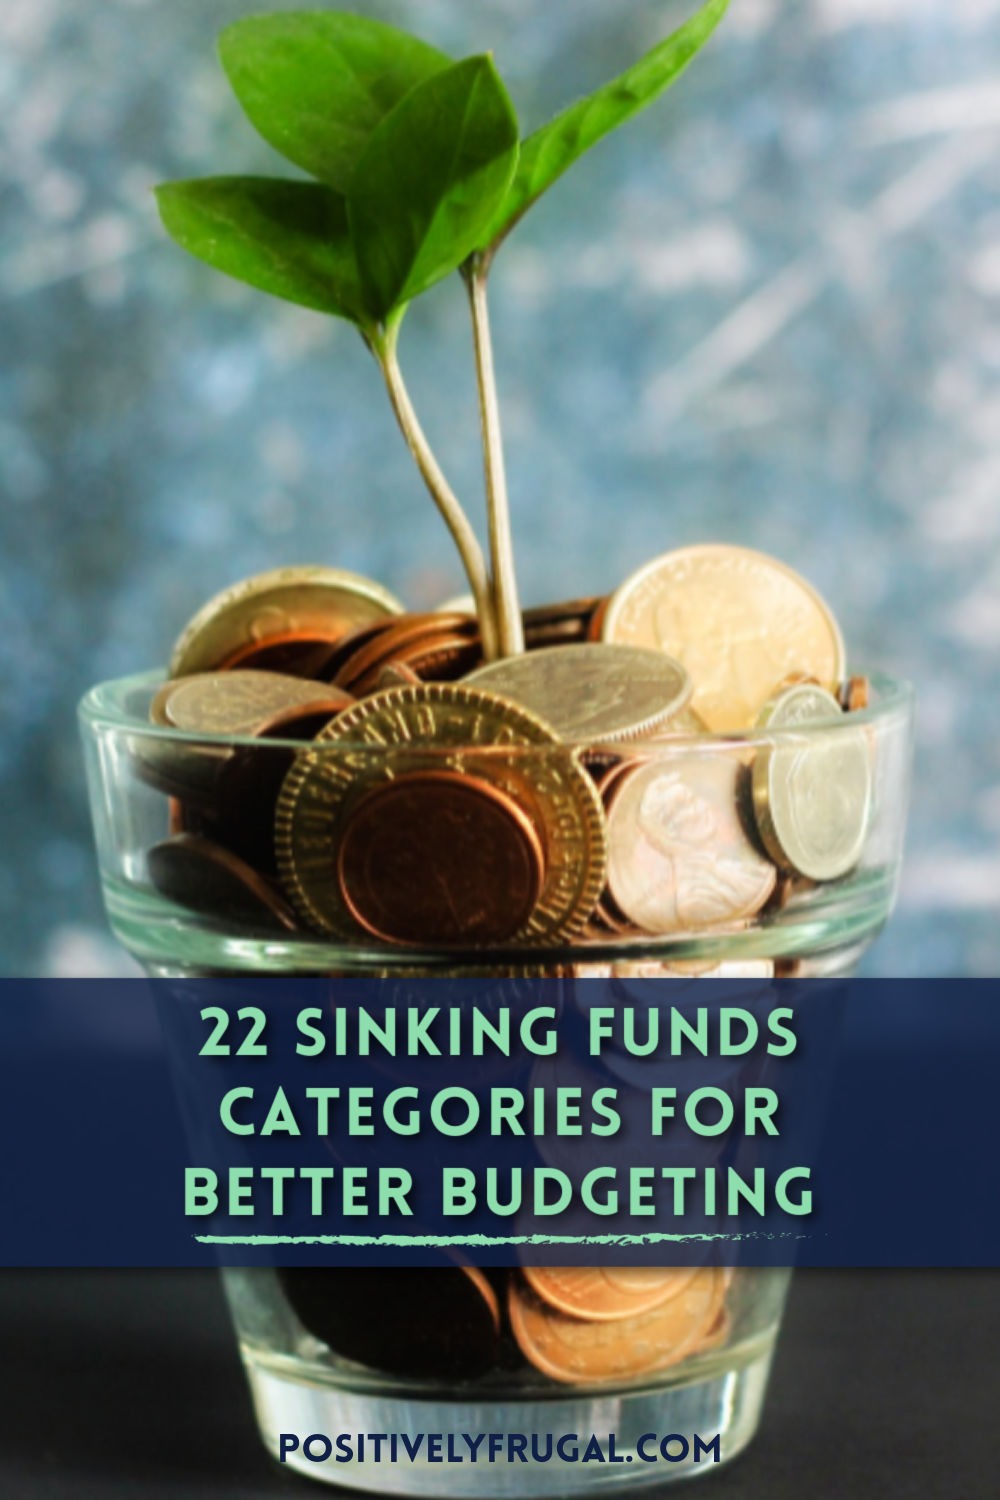 Sinking Funds Categories for Better Budgeting by PositivelyFrugal.com